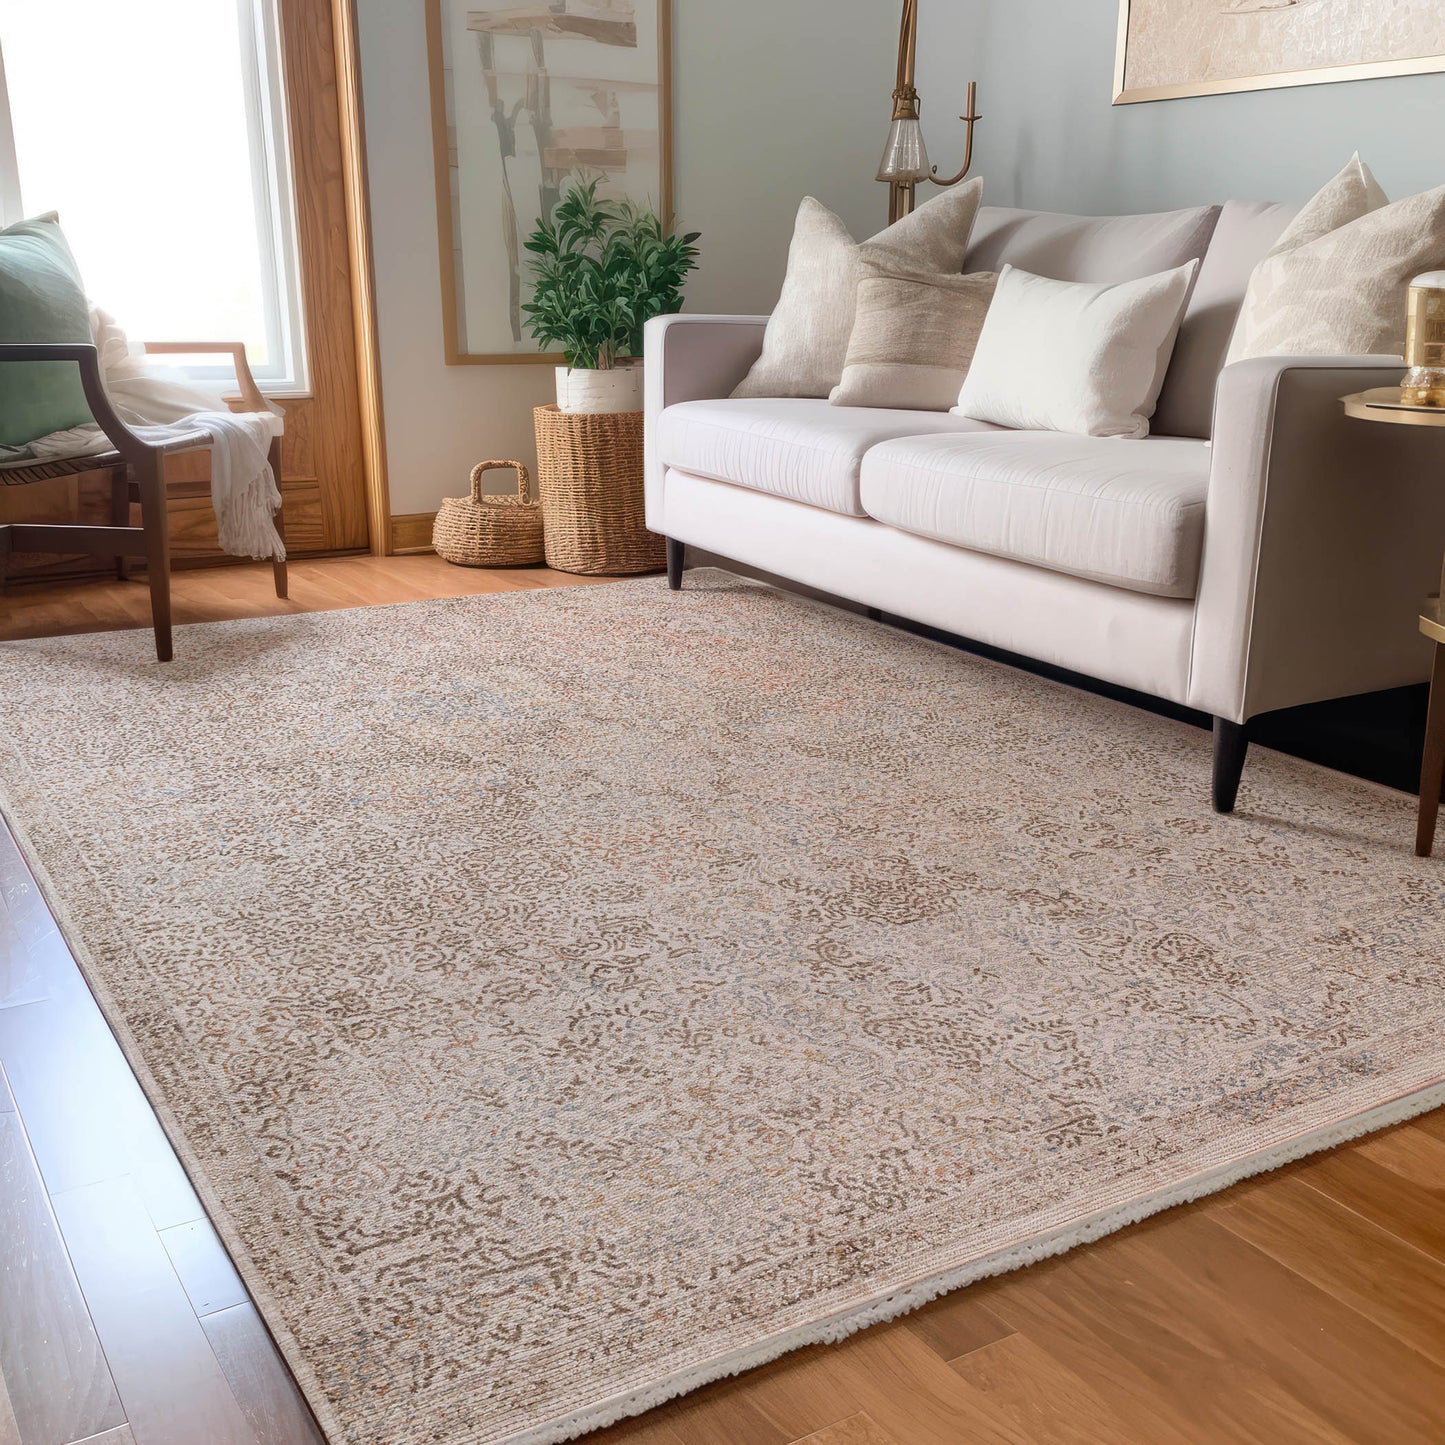 Dalyn Rugs Vienna VI5 Ivory  Traditional Power Woven Rug